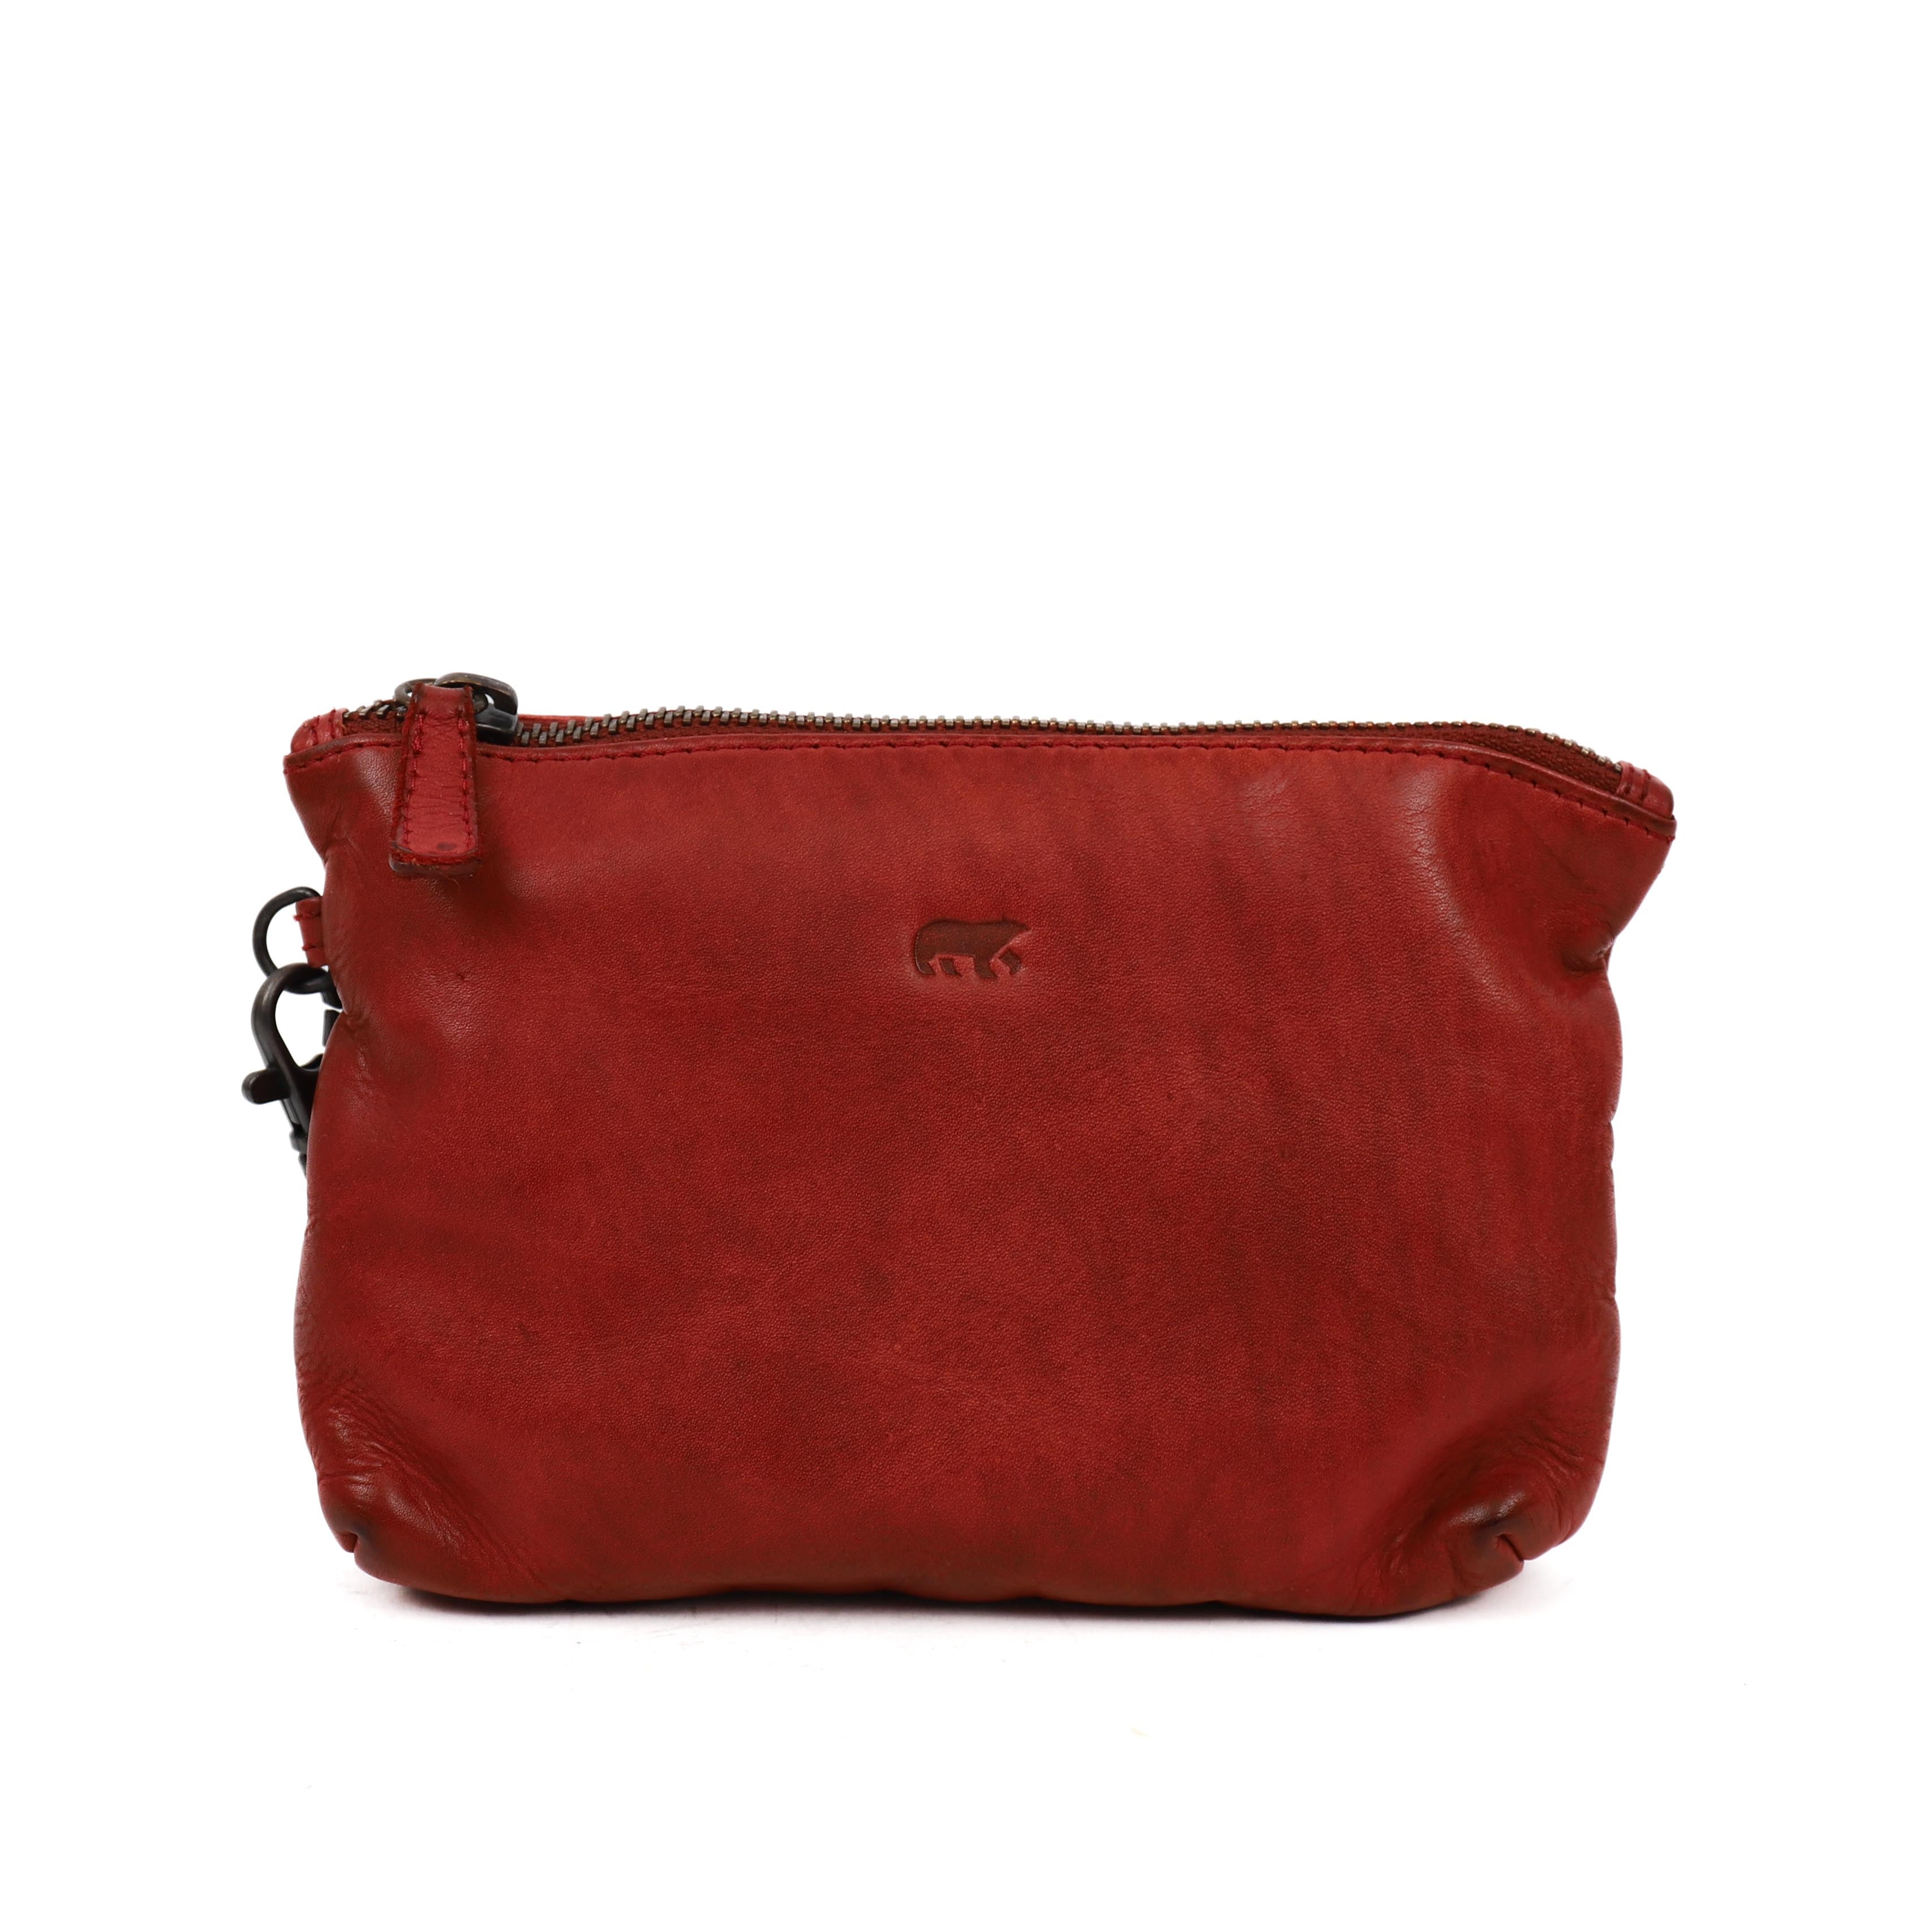 Pouch 'Sjors' red - CL 12510